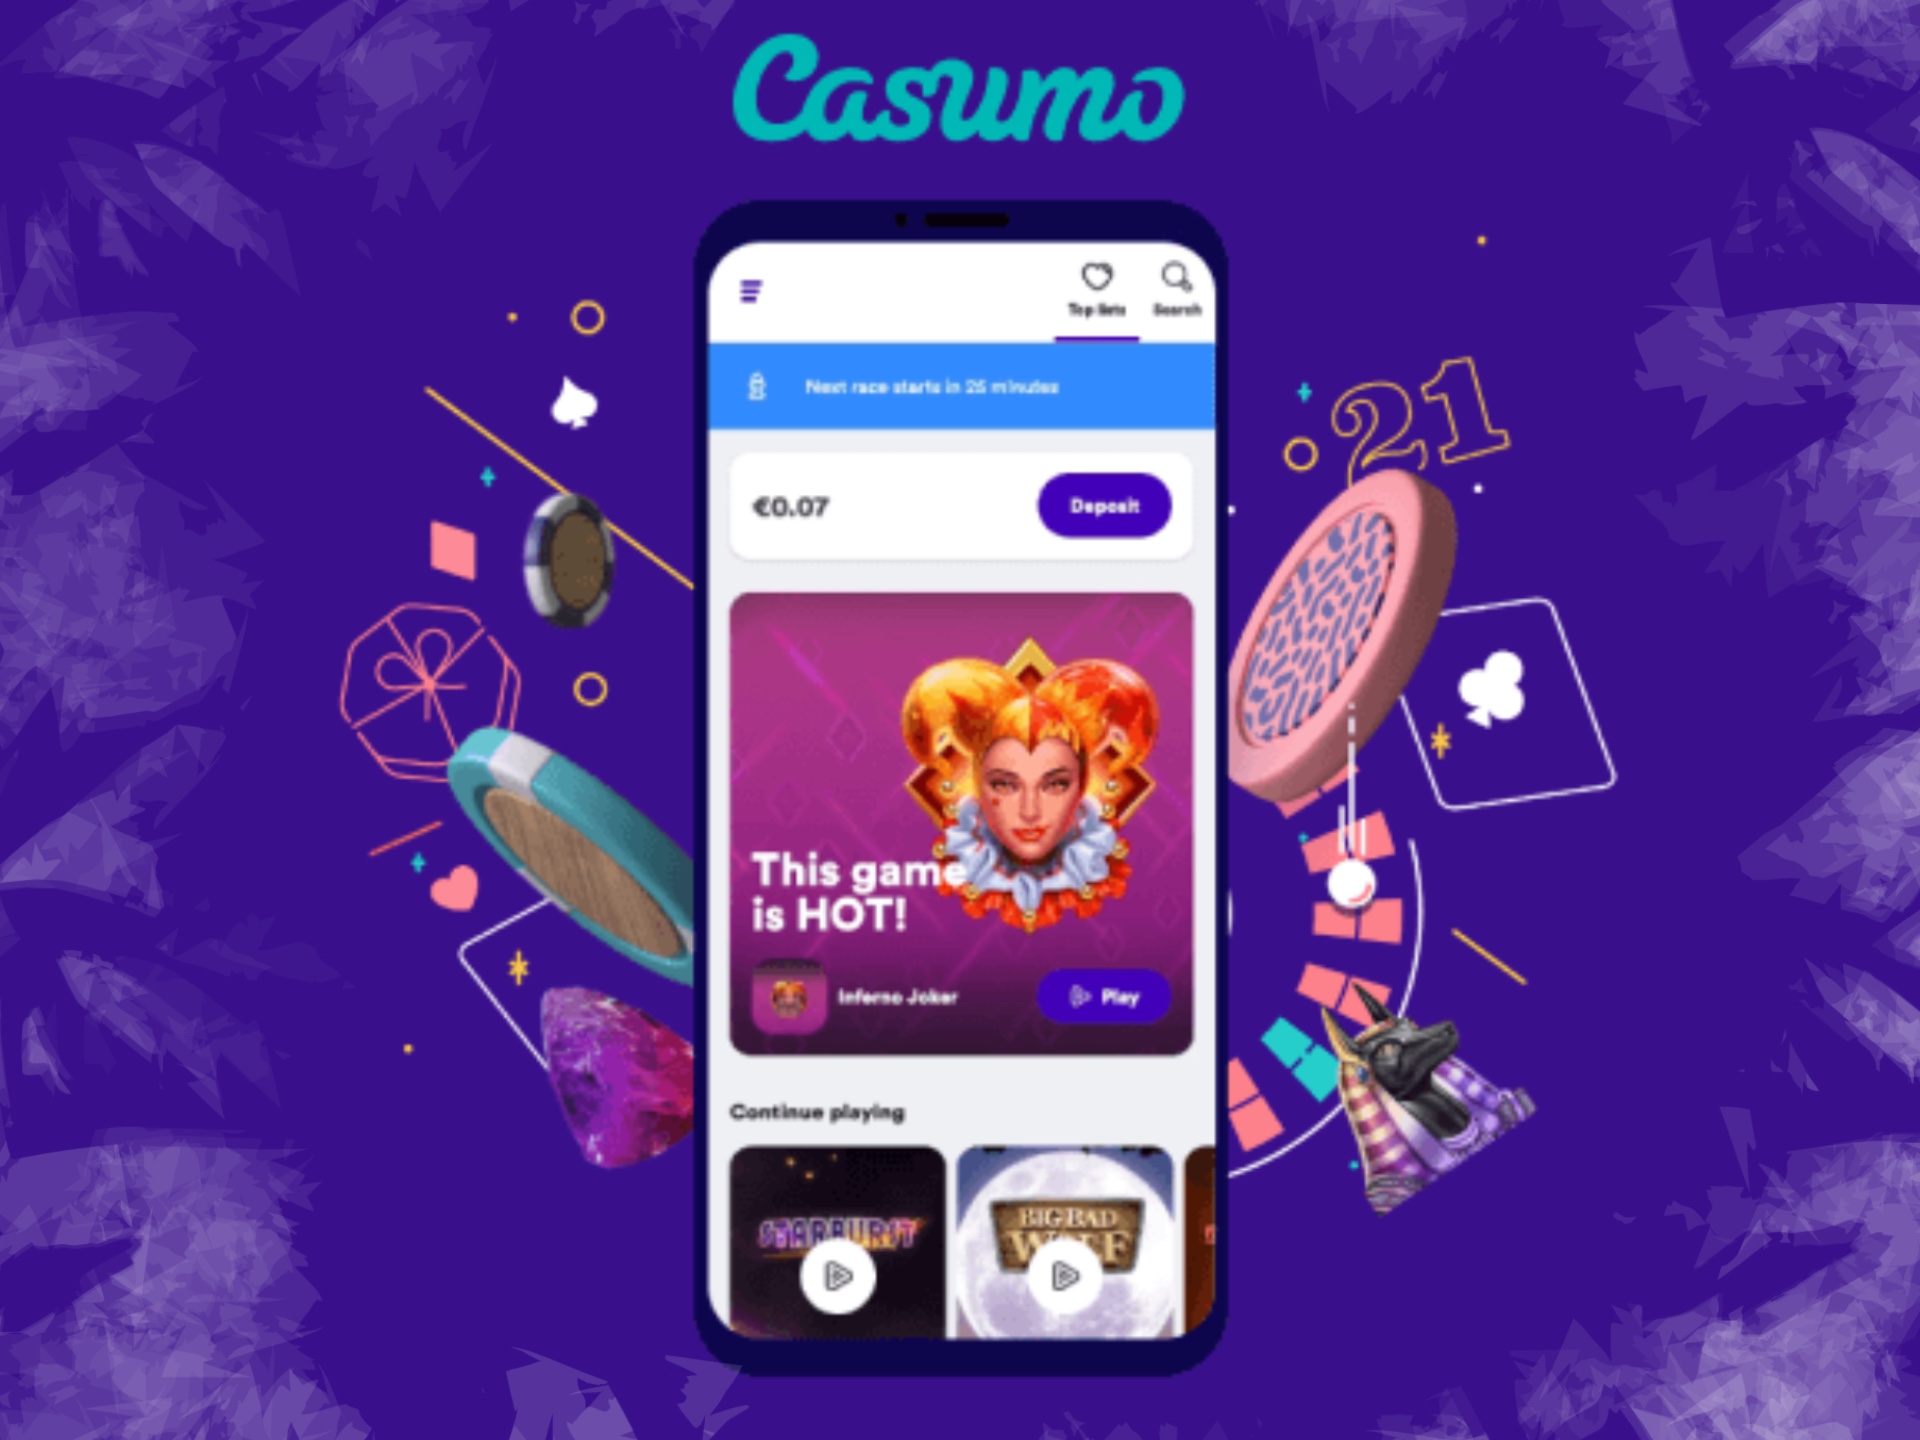 Get the Casumo welcome bonus and spend it on slots.